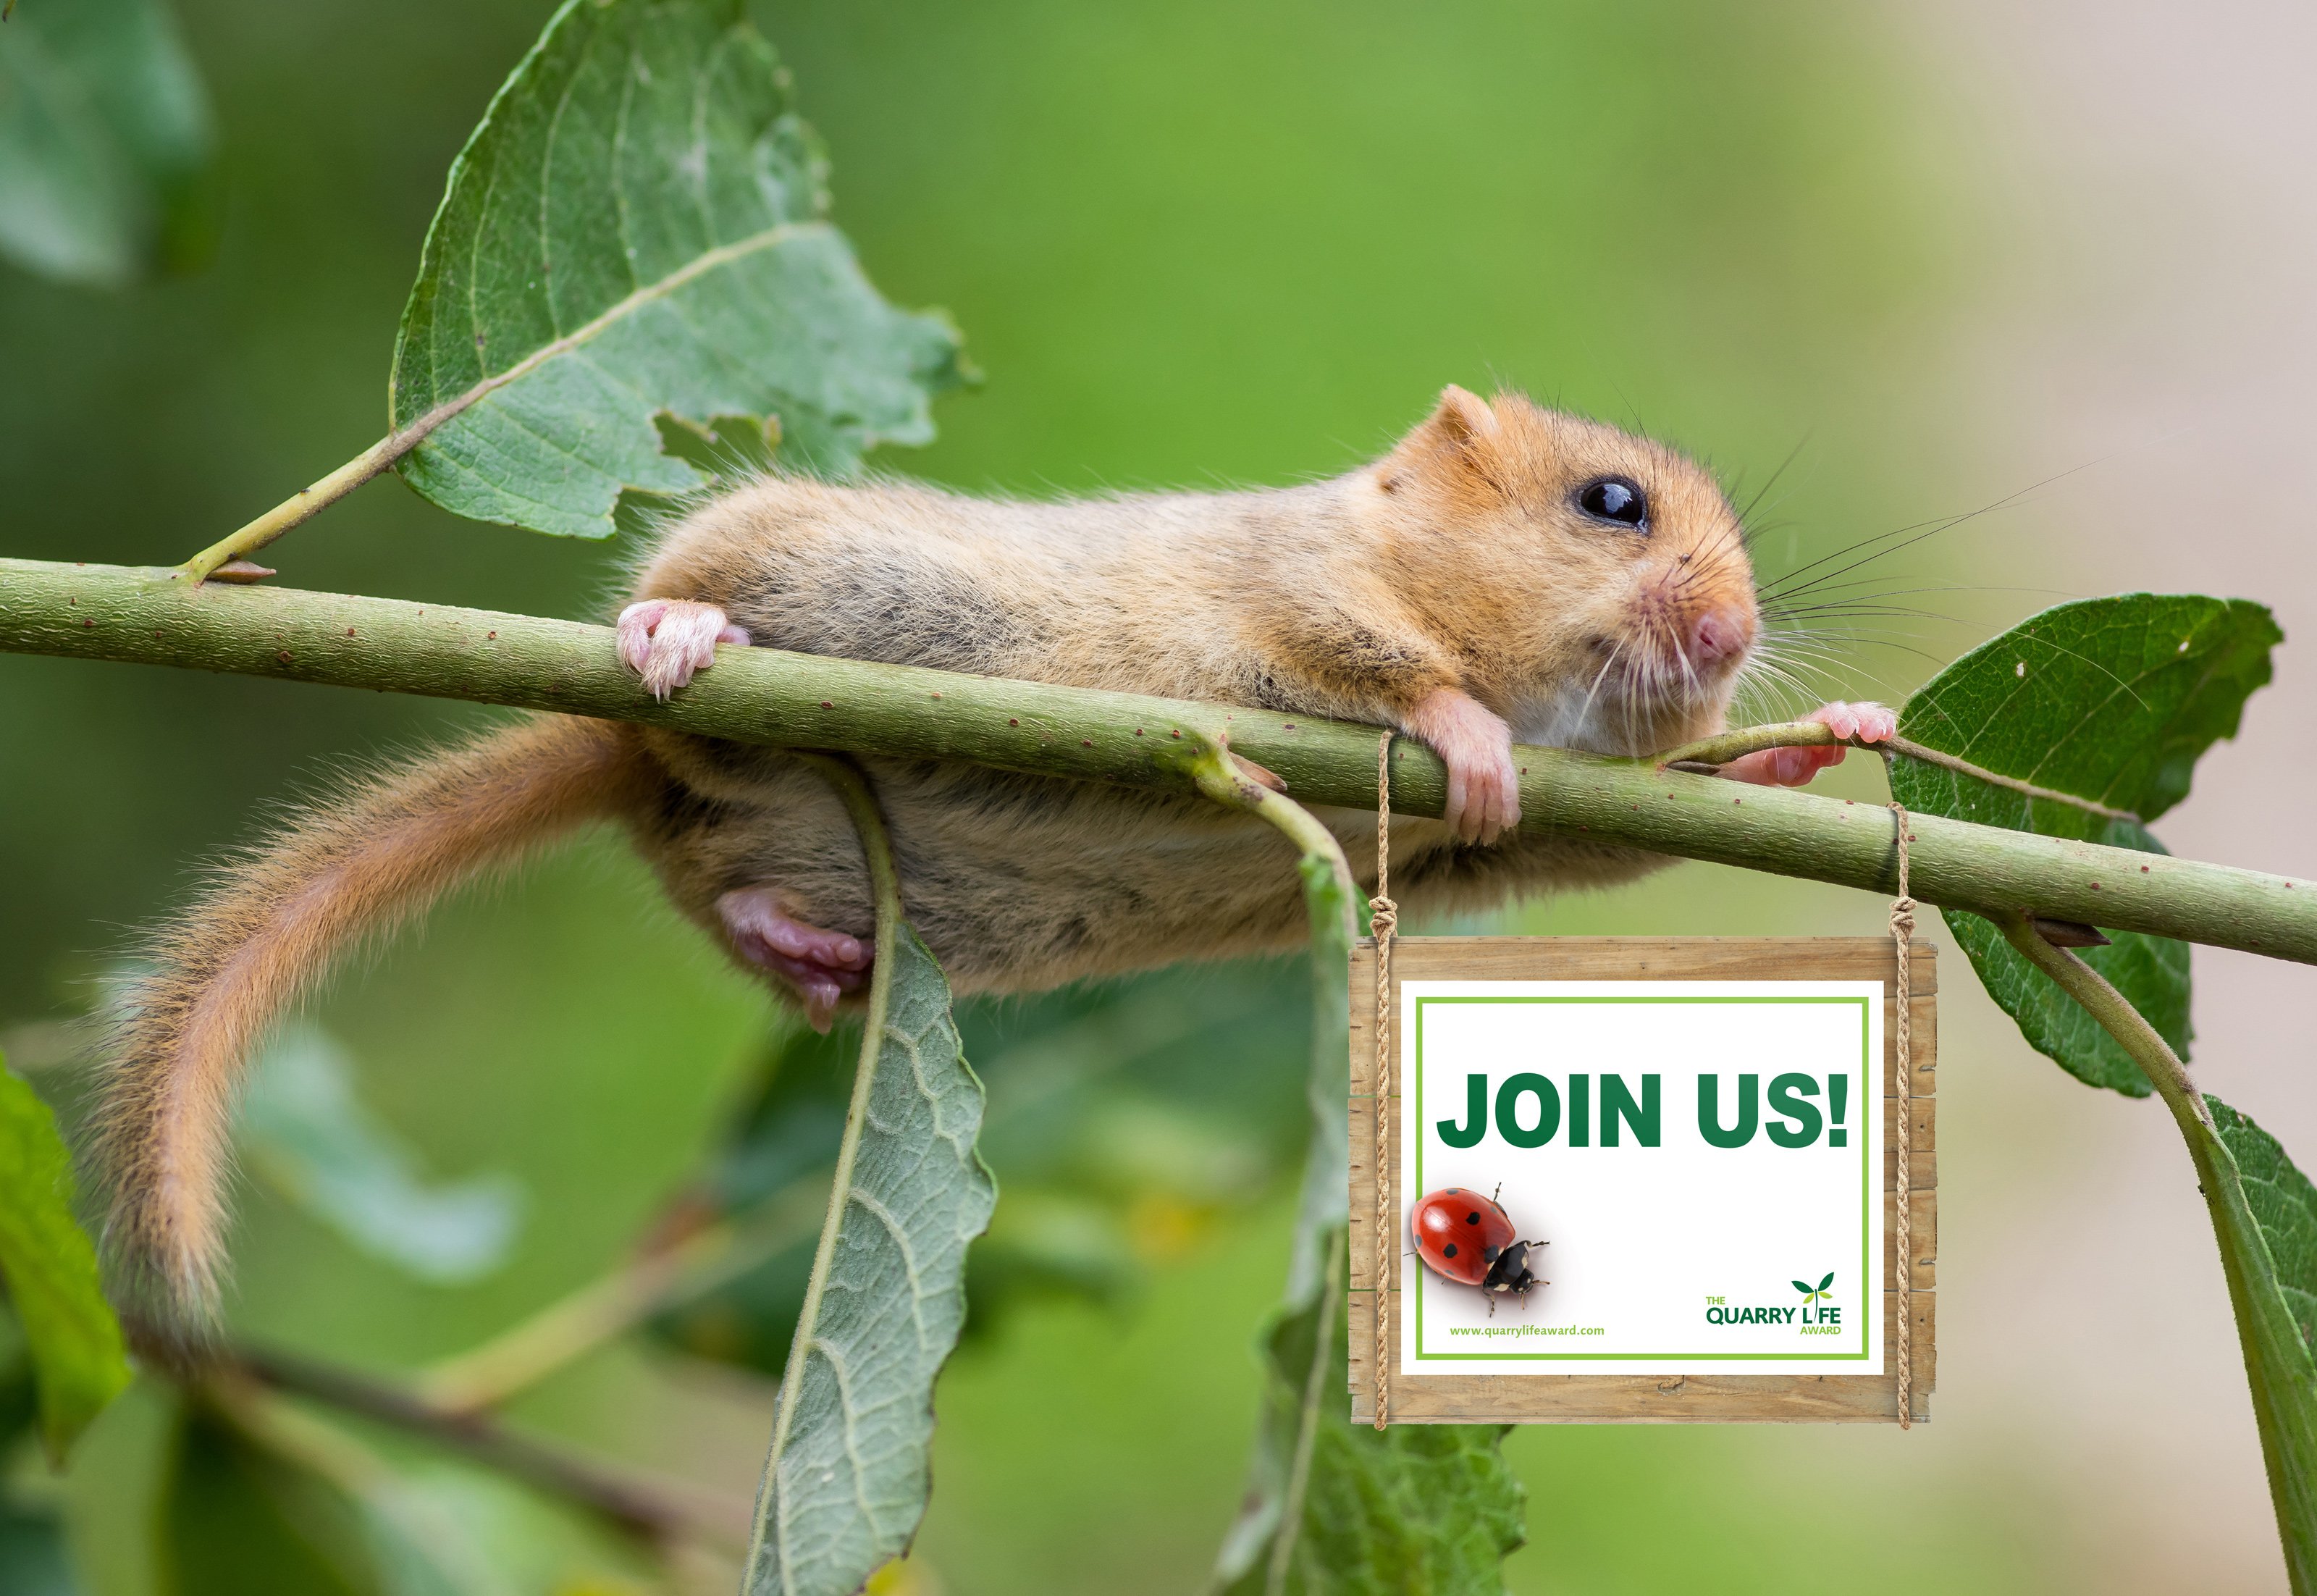 A little mouse is climbing on a small green branch, there is a small sign on the branch that says Join us